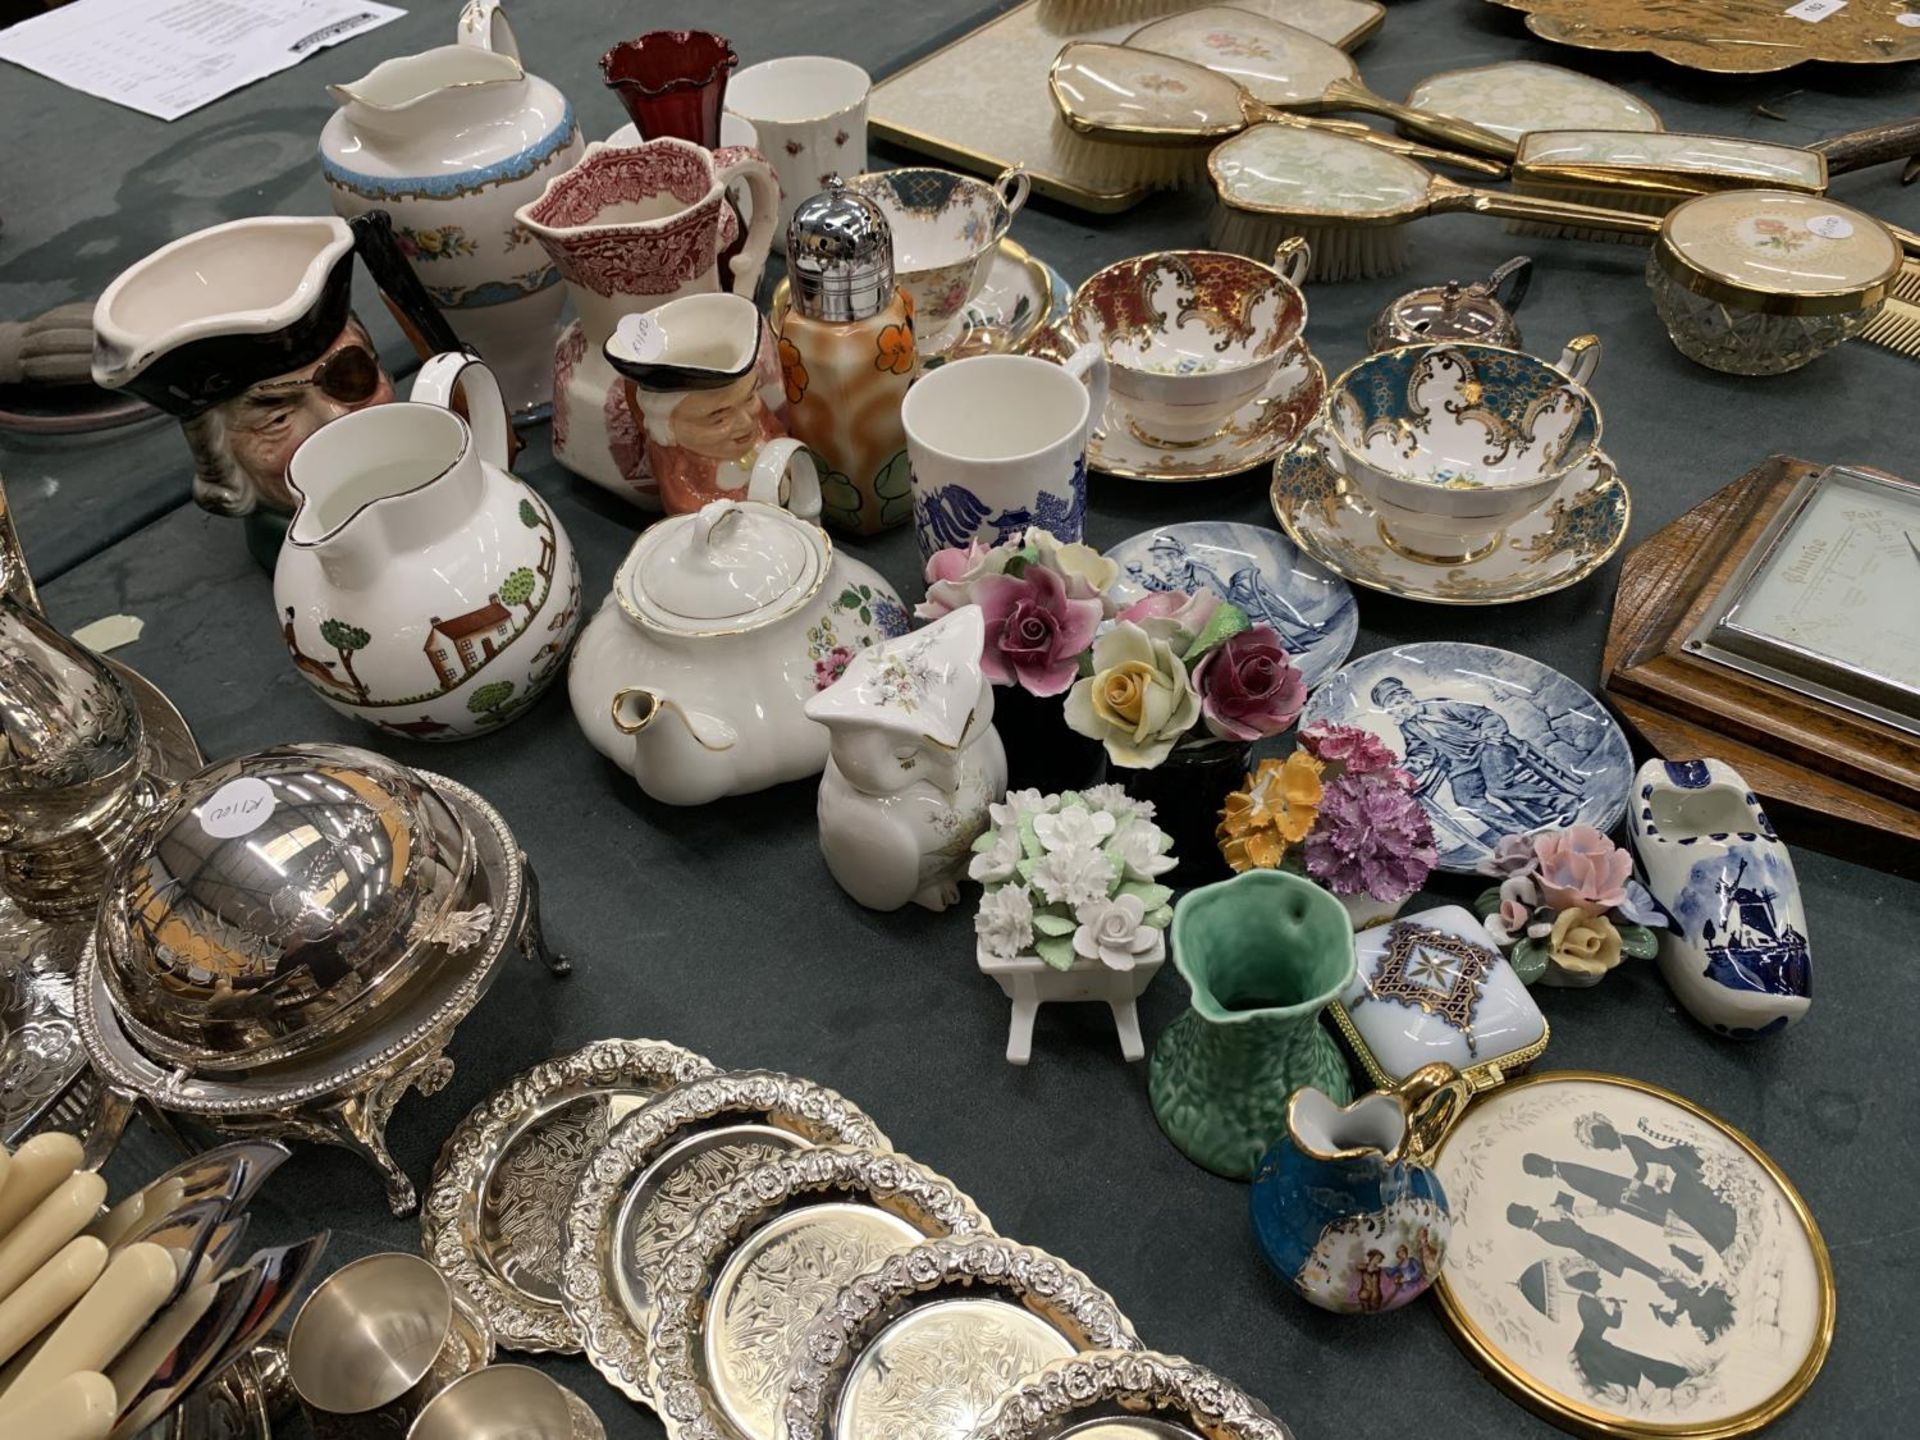 A LARGE QUANTITY OF CERAMIC AND CHINA TO INCLUDE PARAGON CUPS AND SAUCERS, FLORAL POSIES, CROWN - Image 5 of 8